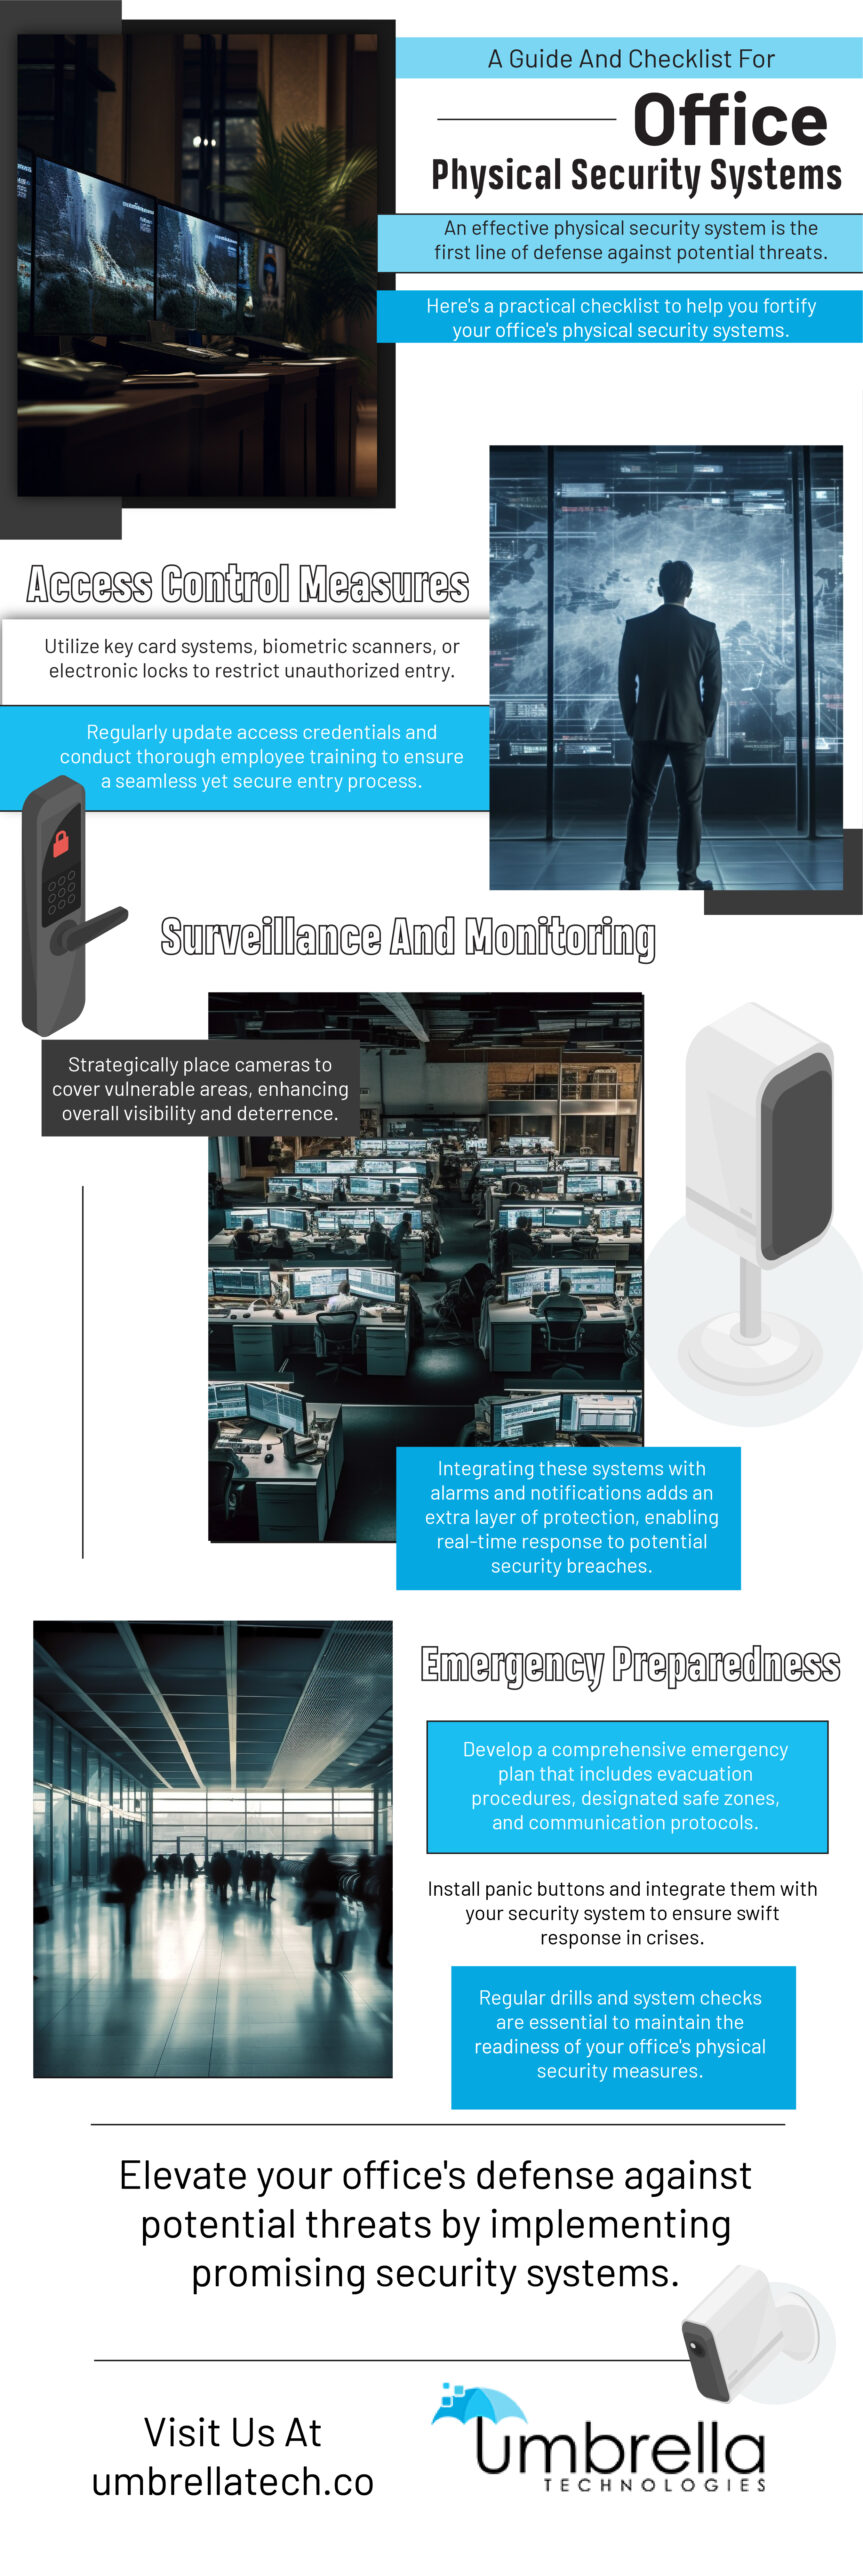 umbrellatech info 01 scaled A Guide And Checklist For Office Physical Security Systems